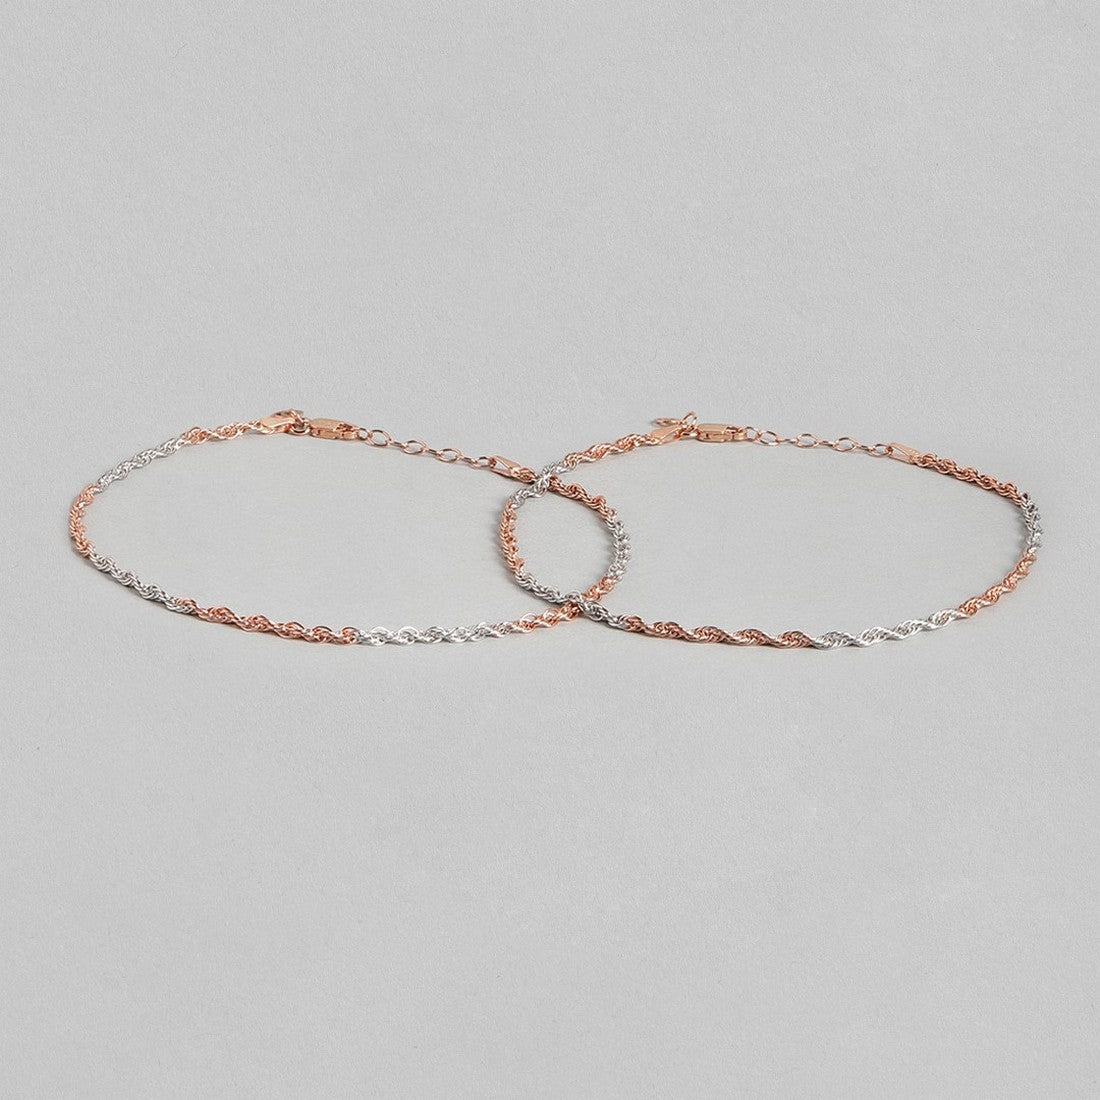 Dual Tone Helix 925 Sterling Silver Anklet